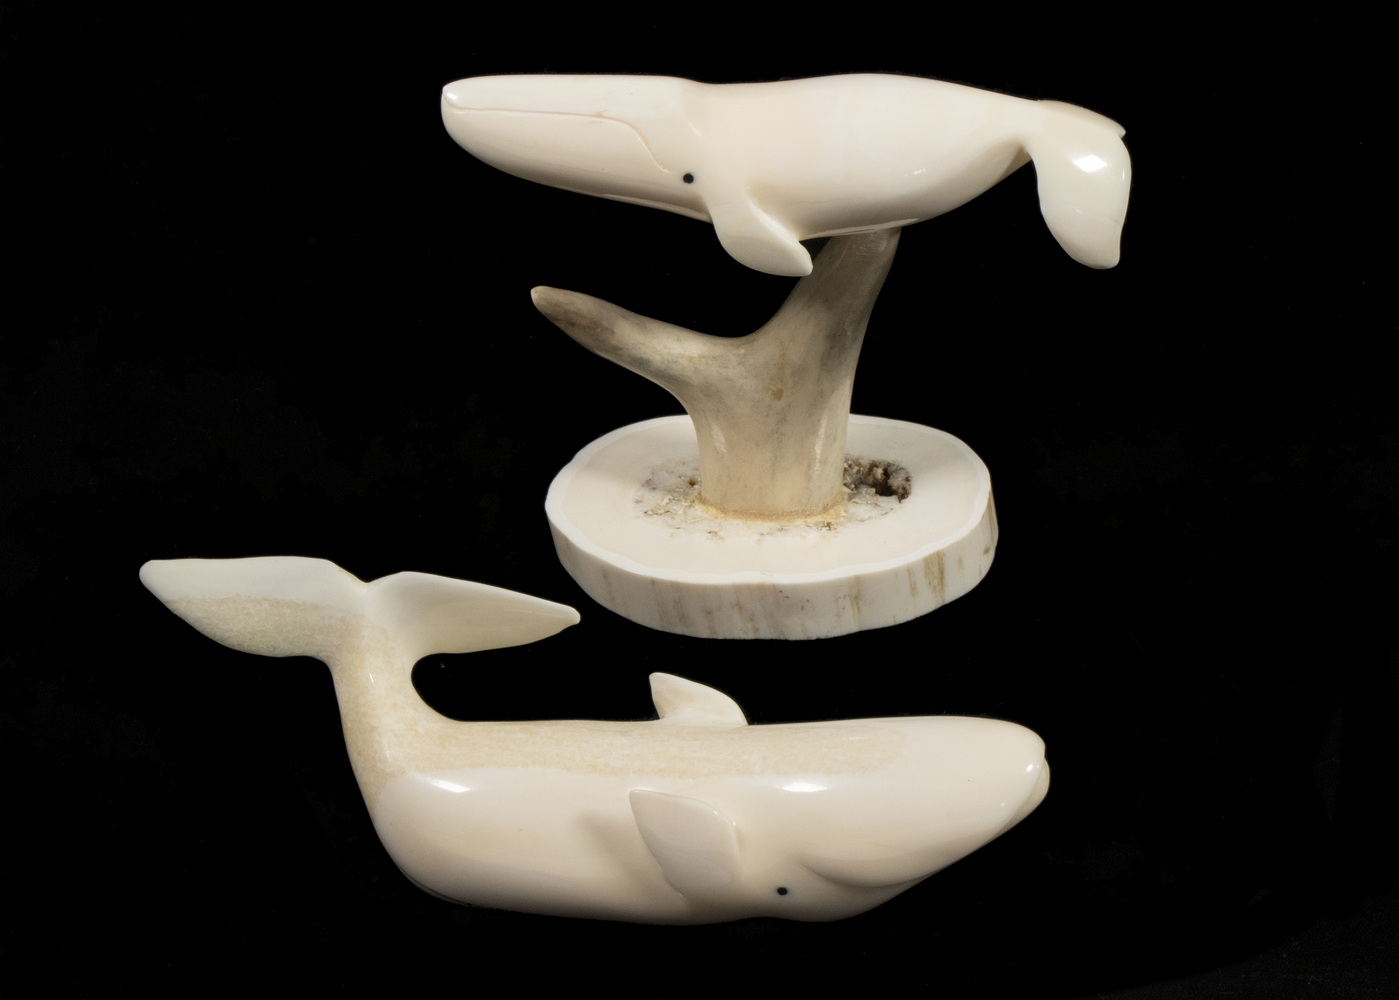  2 INUIT SCULPTURES OF RIGHT WHALES  2b1d61